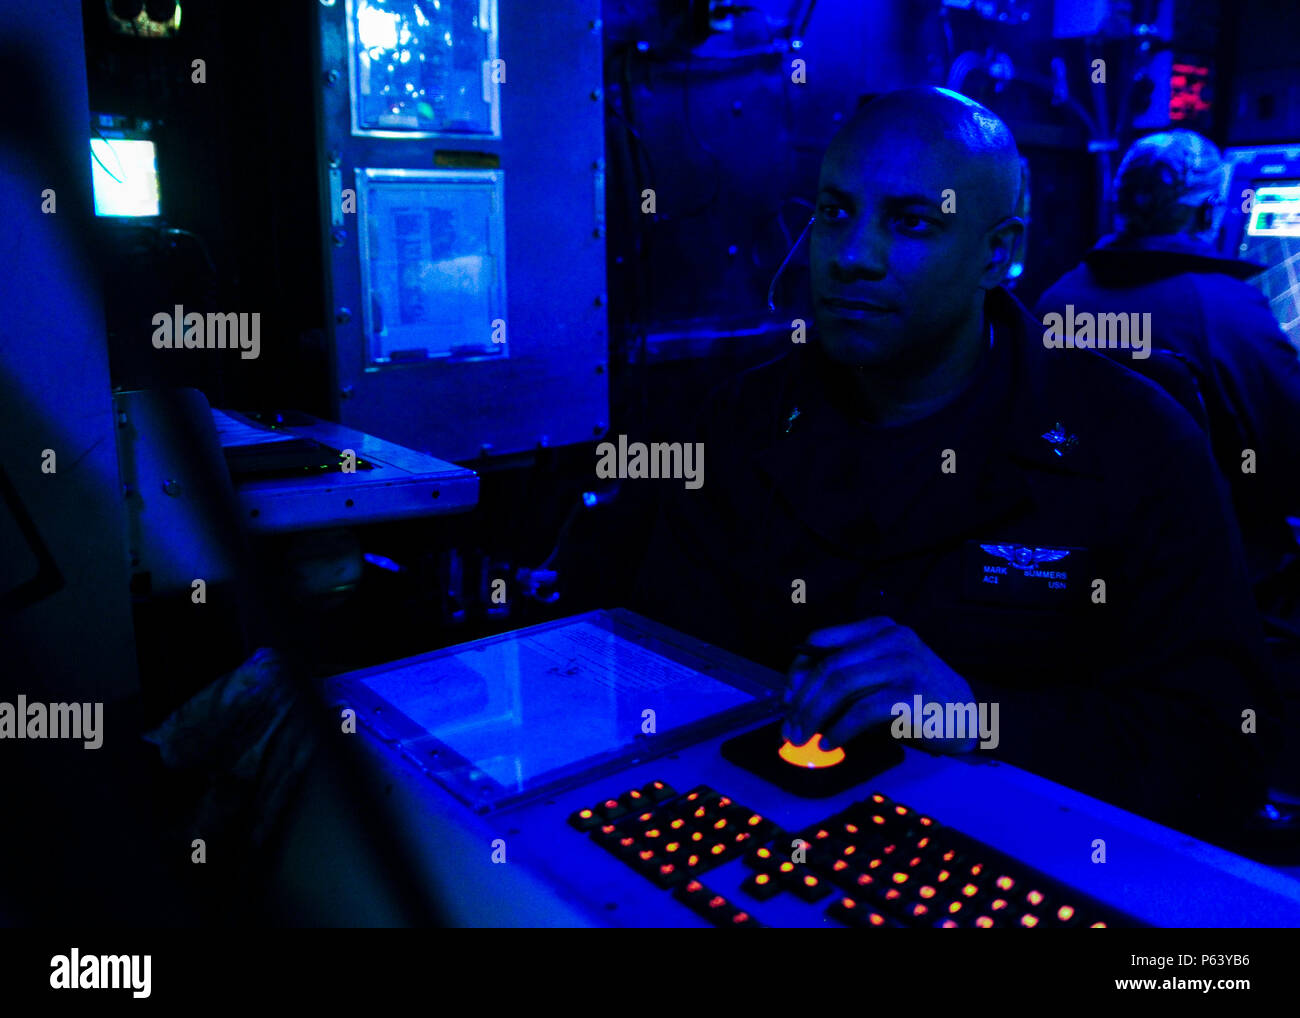 160419-N-VH385-030 ATLANTIC OCEAN (April 19, 2016) – Air Traffic Controller 1st Class Mark Summers, from Statesville, North Carolina, mans the departure control system during flight operations aboard the aircraft carrier USS George Washington (CVN 73). Washington, homeported in Norfolk, is underway conducting carrier qualifications in the Atlantic Ocean. (U.S. Navy photo by Mass Communication Specialist 3rd Class Wyatt L. Anthony/Released) Stock Photo